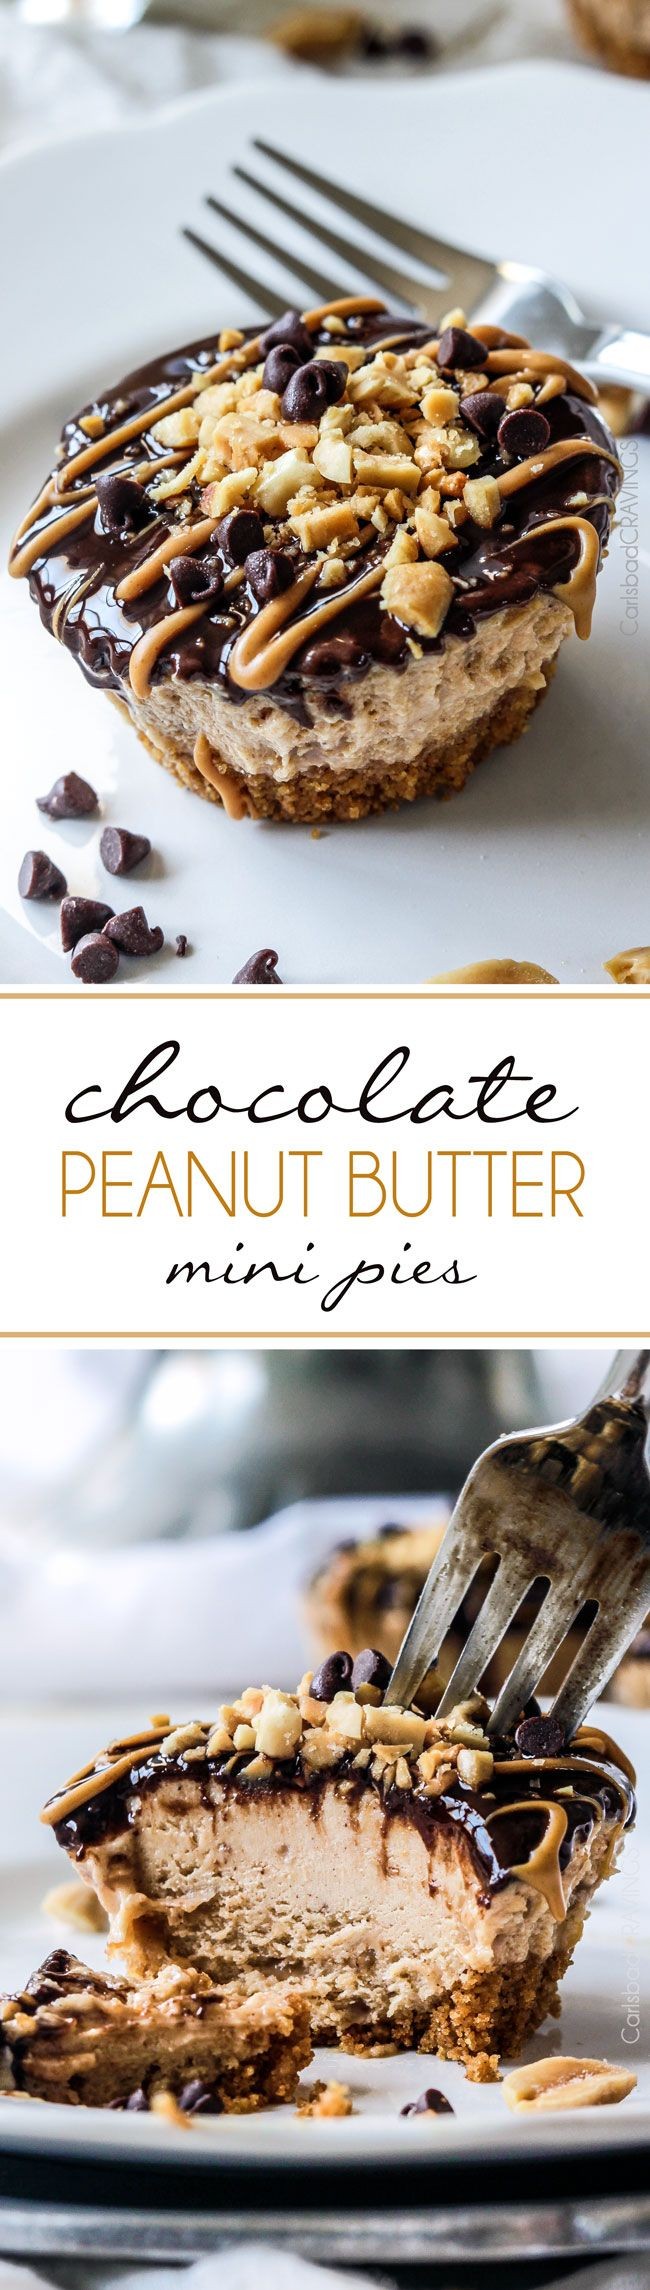 Mini Chocolate Peanut Butter Pies are easy, make a...